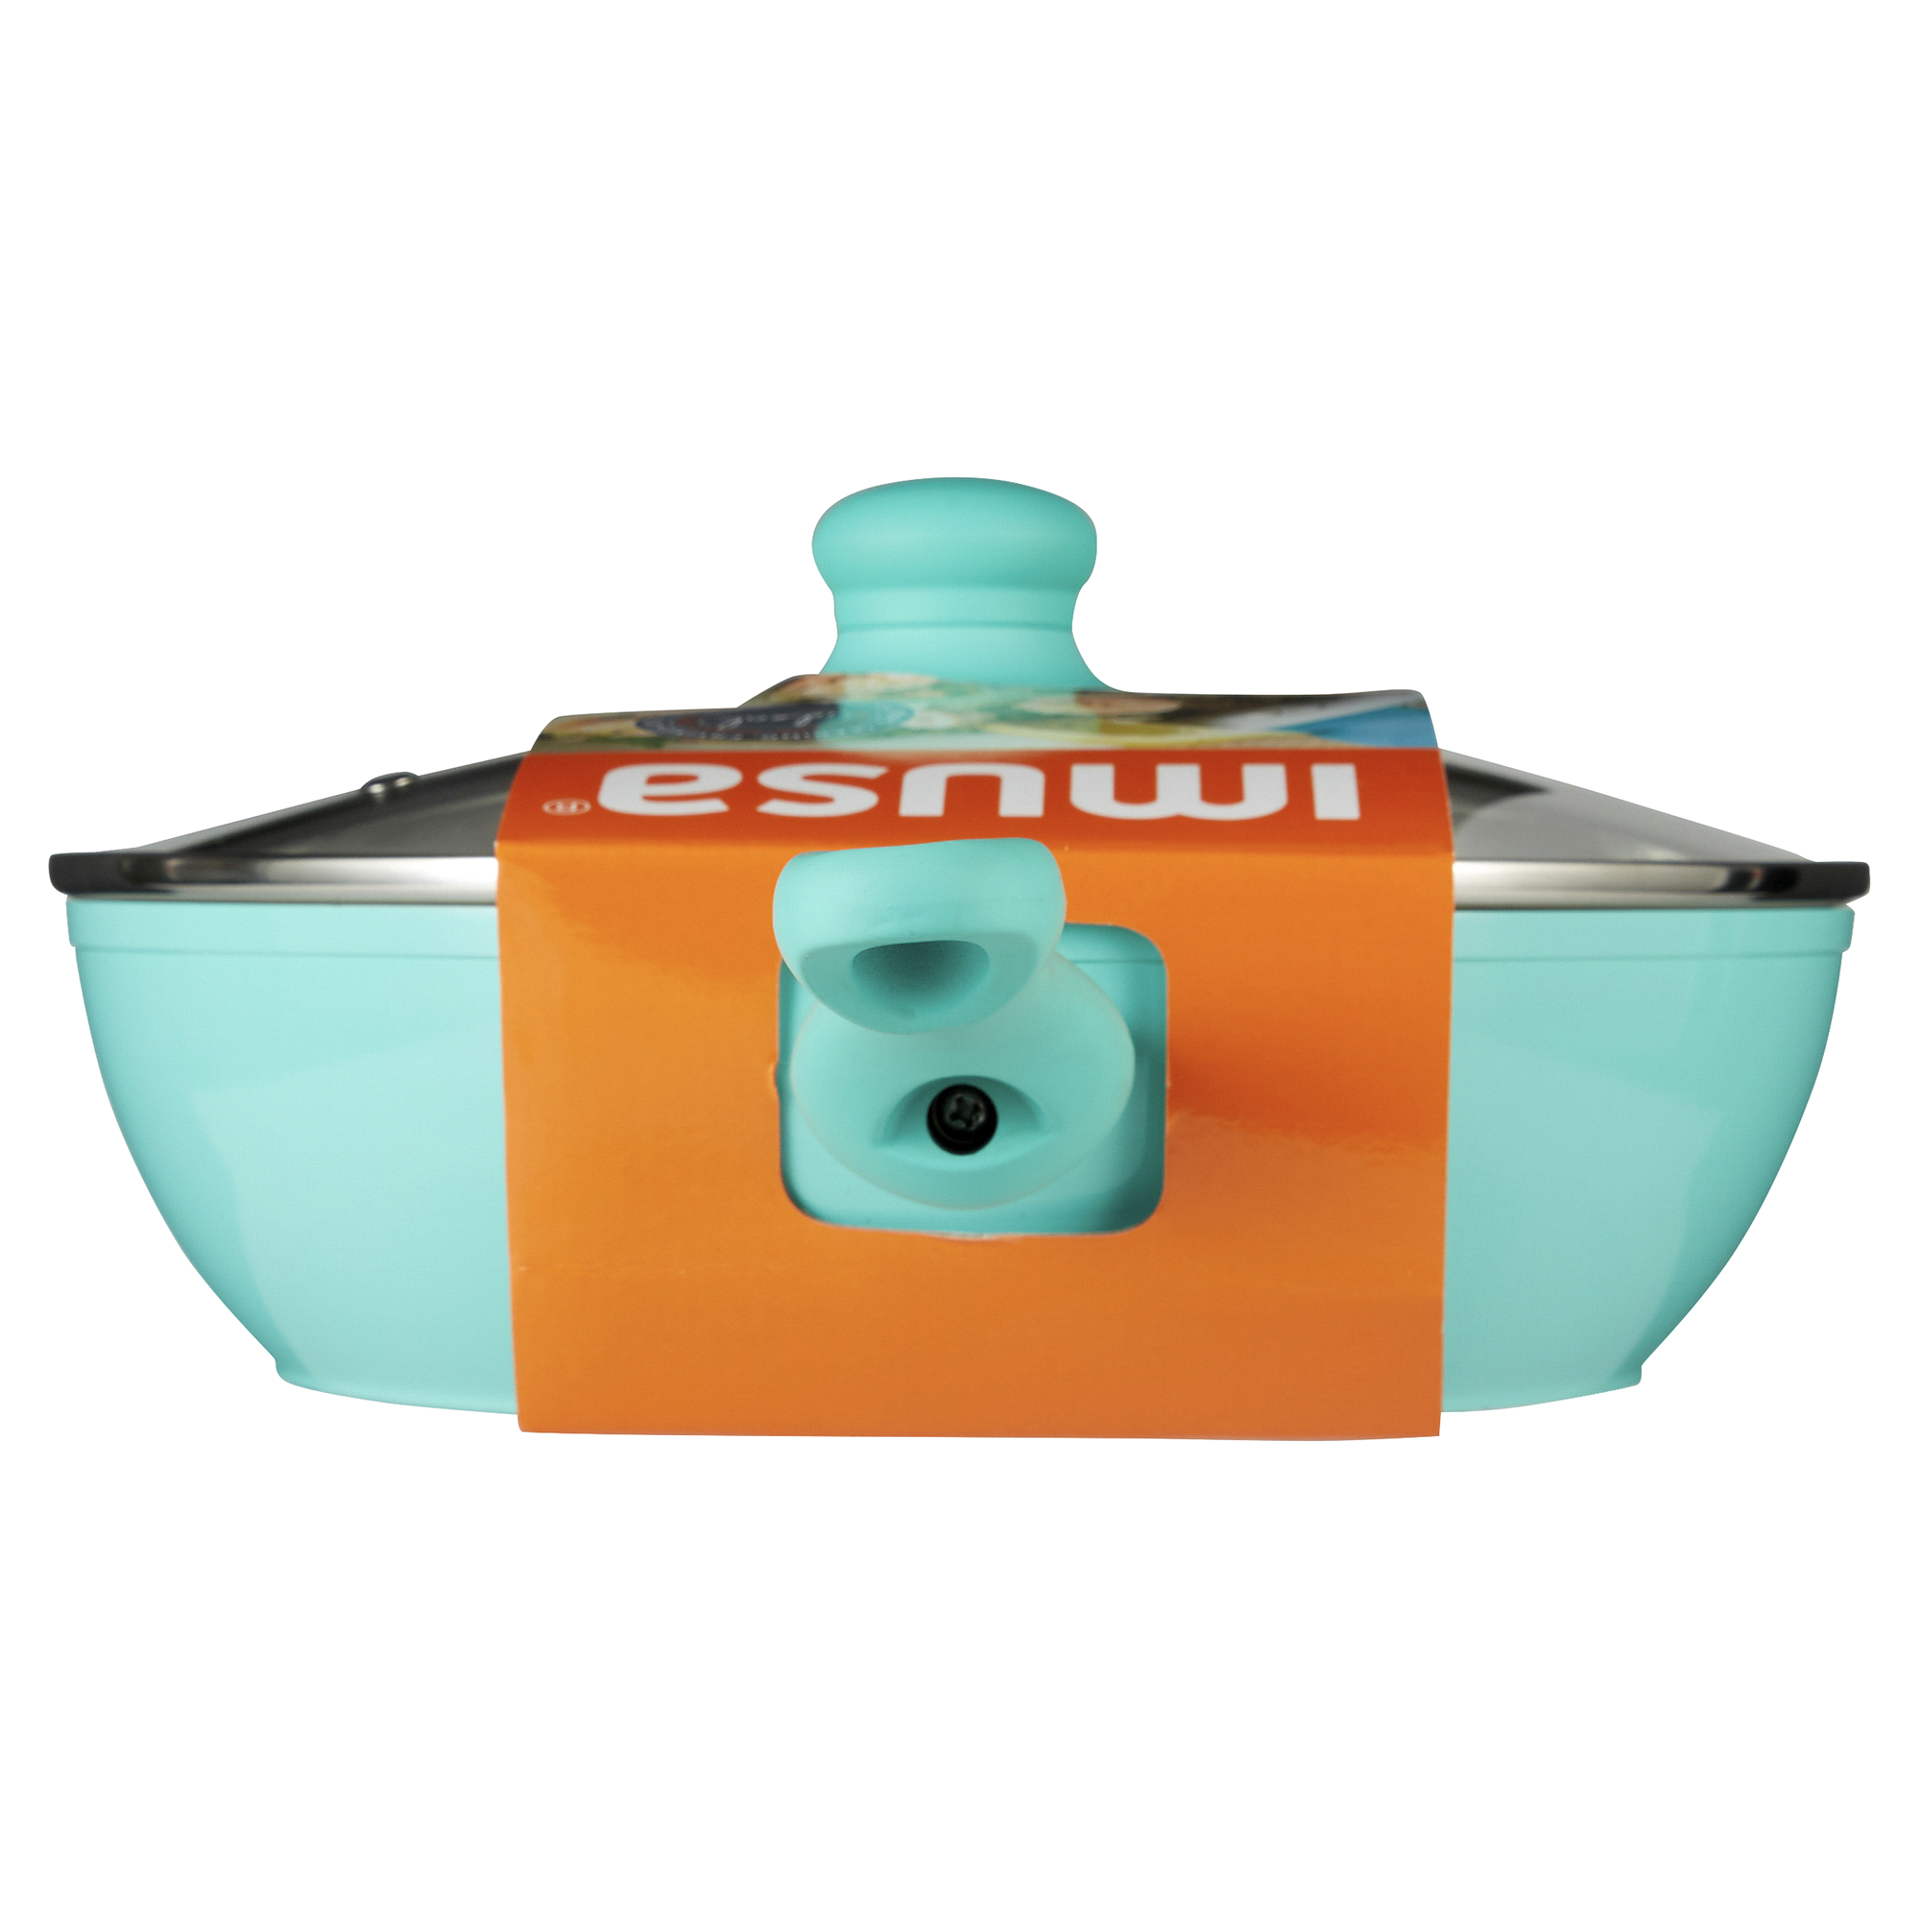 slide 19 of 29, IMUSA USA IMU-30053 Forged Teal Jumbo Cooker with Ceramic Nonstick, 4 qt